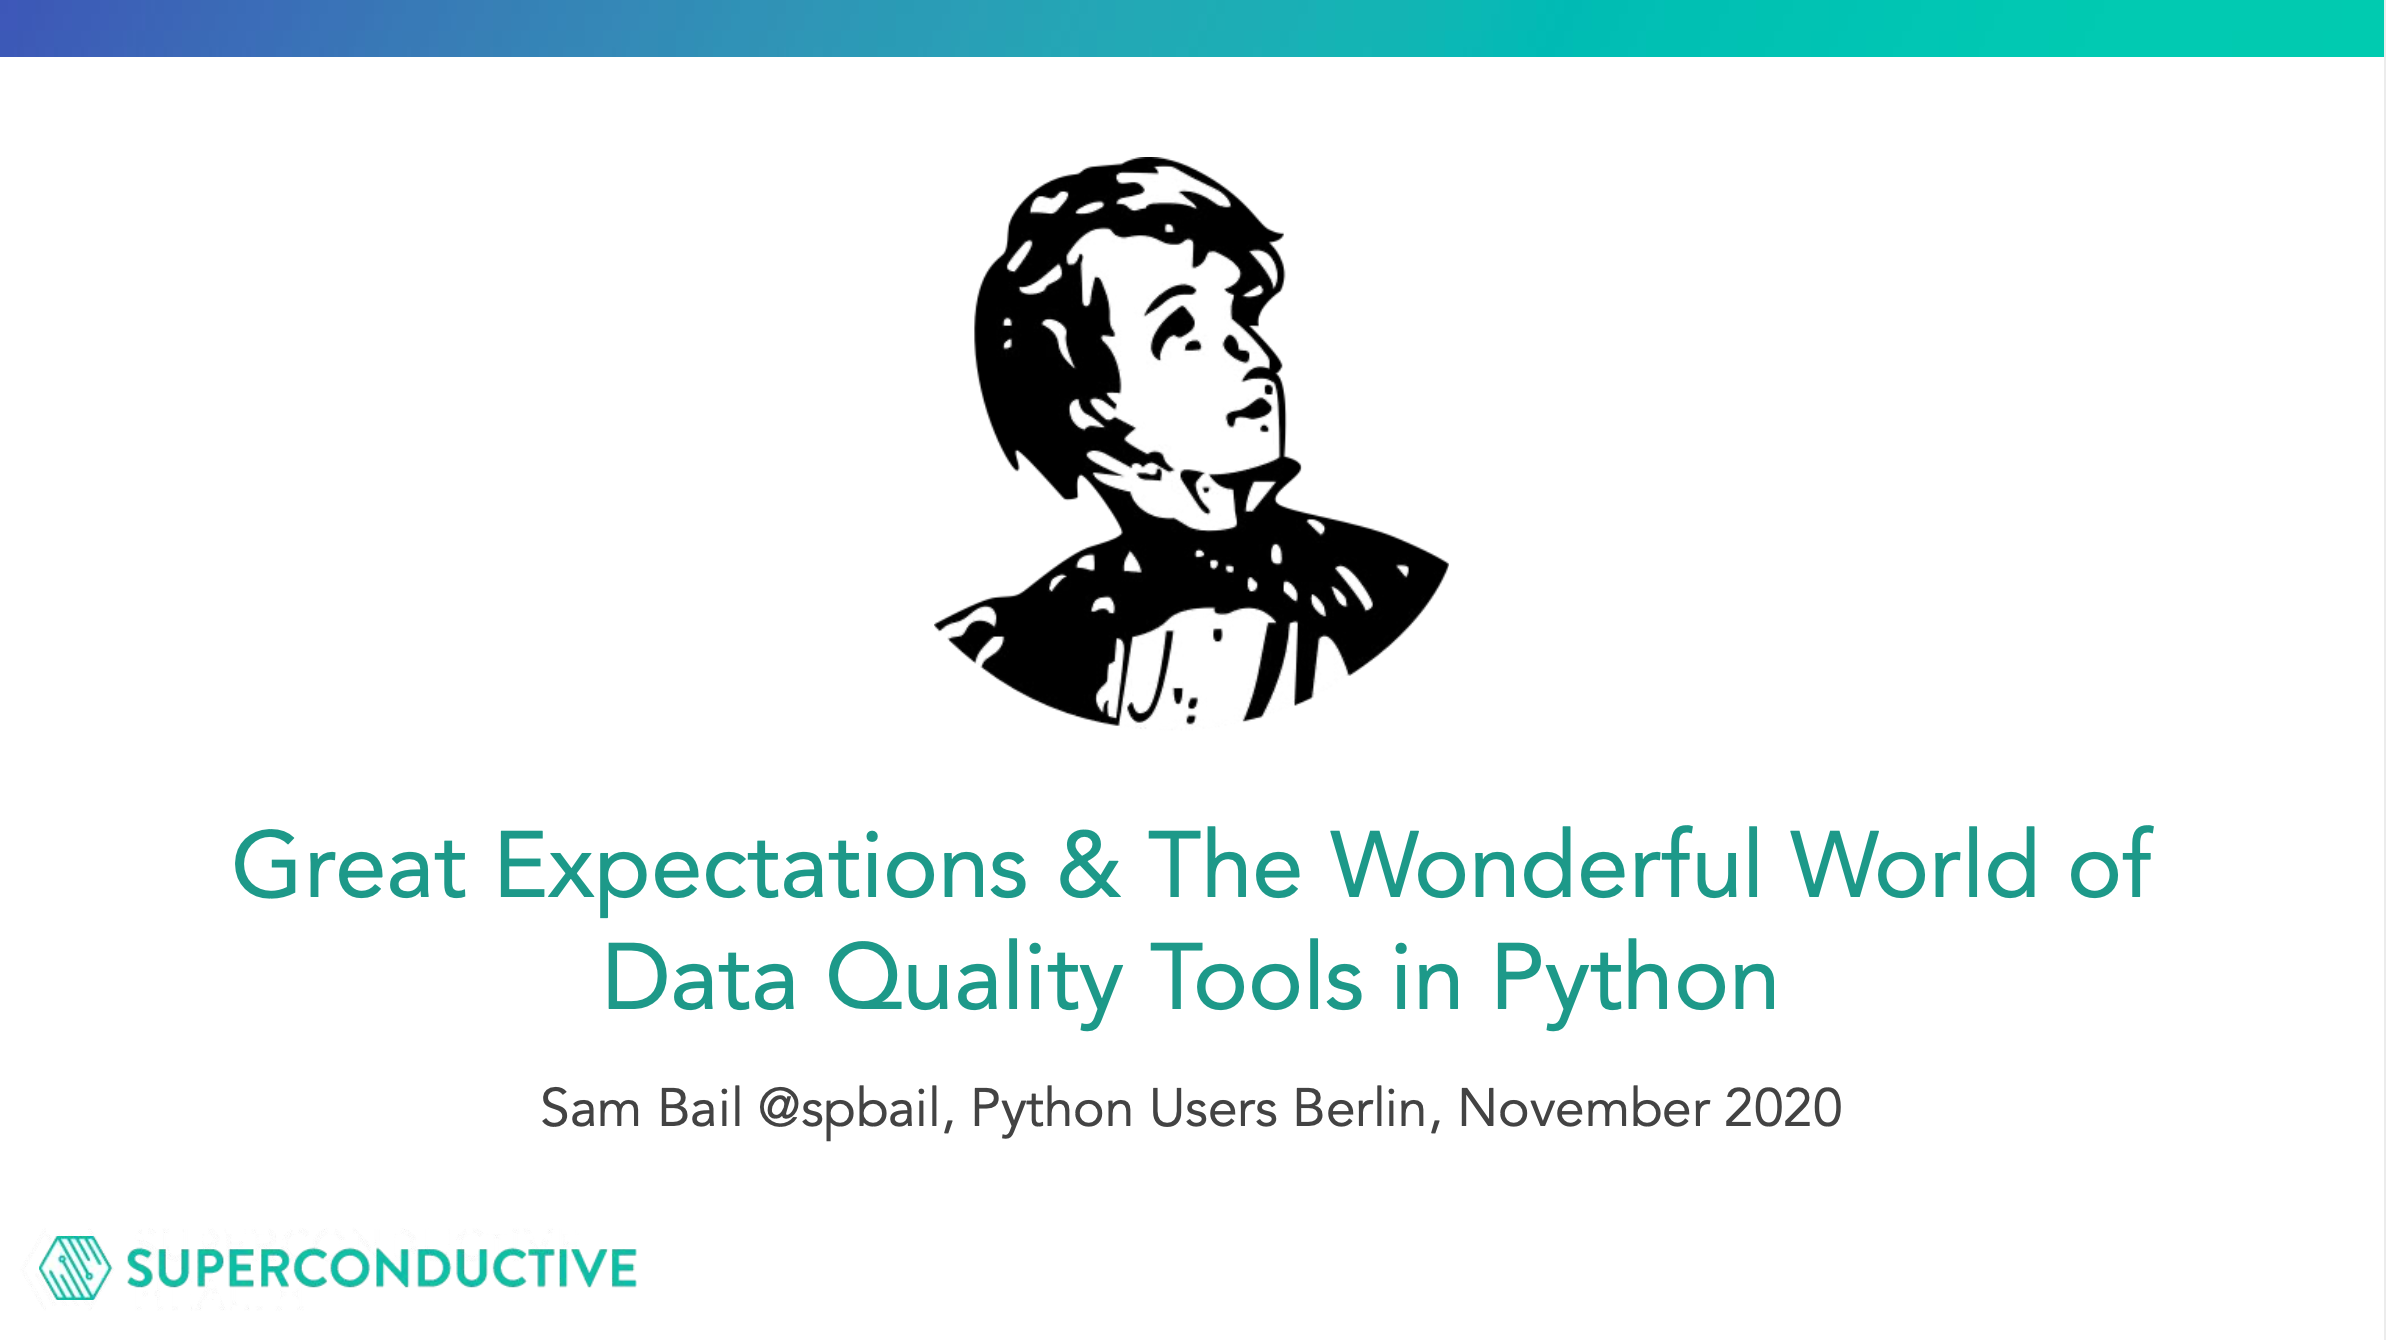 «Great Expectations & The Wonderfull World of Data Quality Tools in Python» by Sam Bail